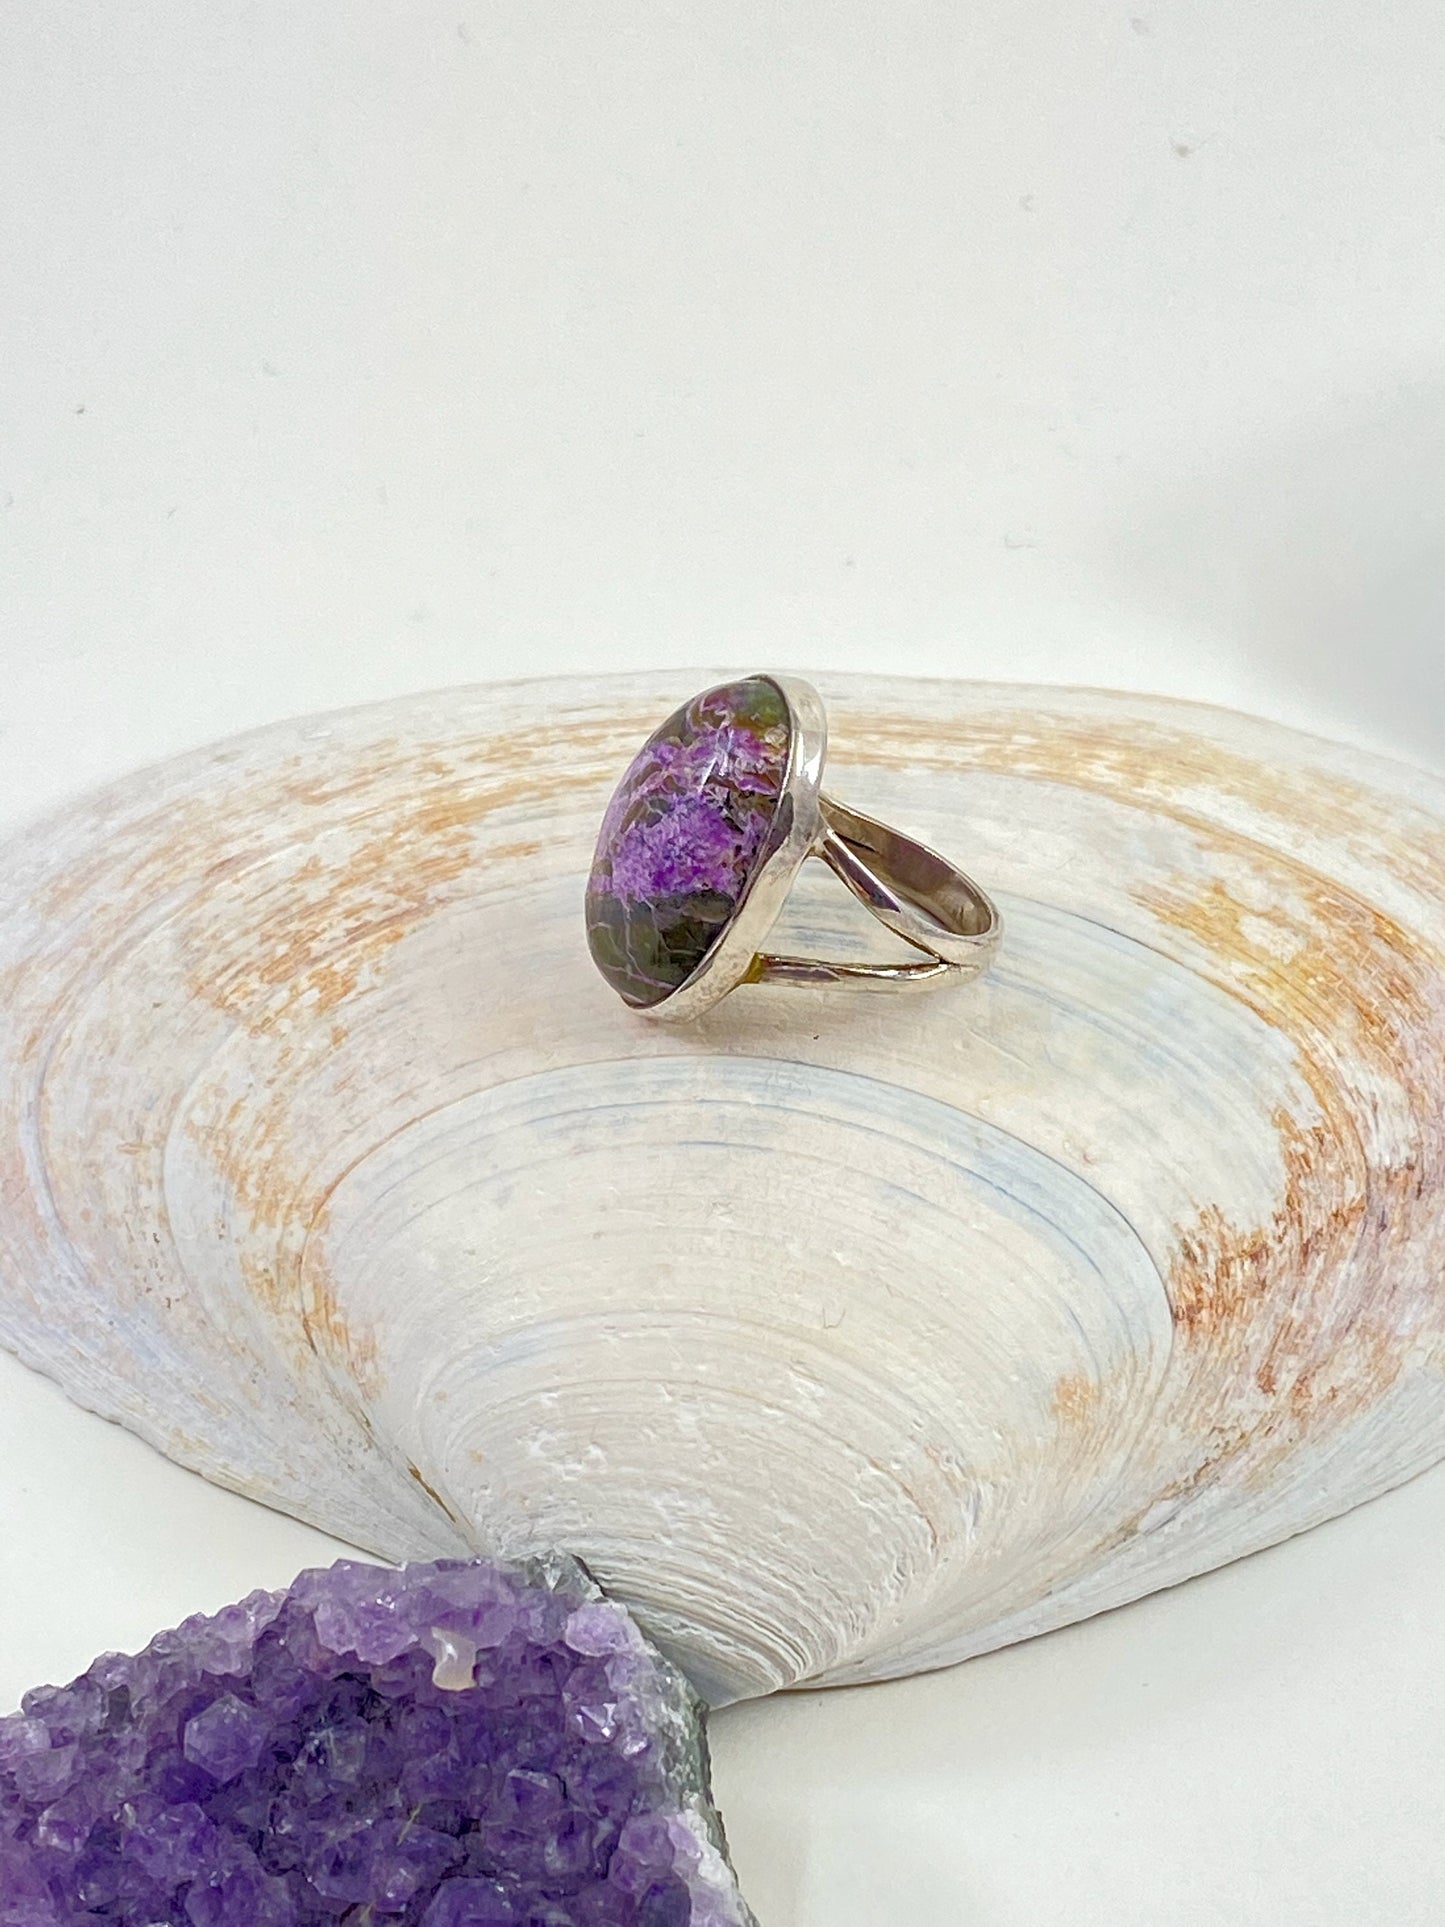 Gorgeous handmade Purperite stone sterling silver ring. This beautiful oval cut stone is a size 6 3/4 stunning ring.